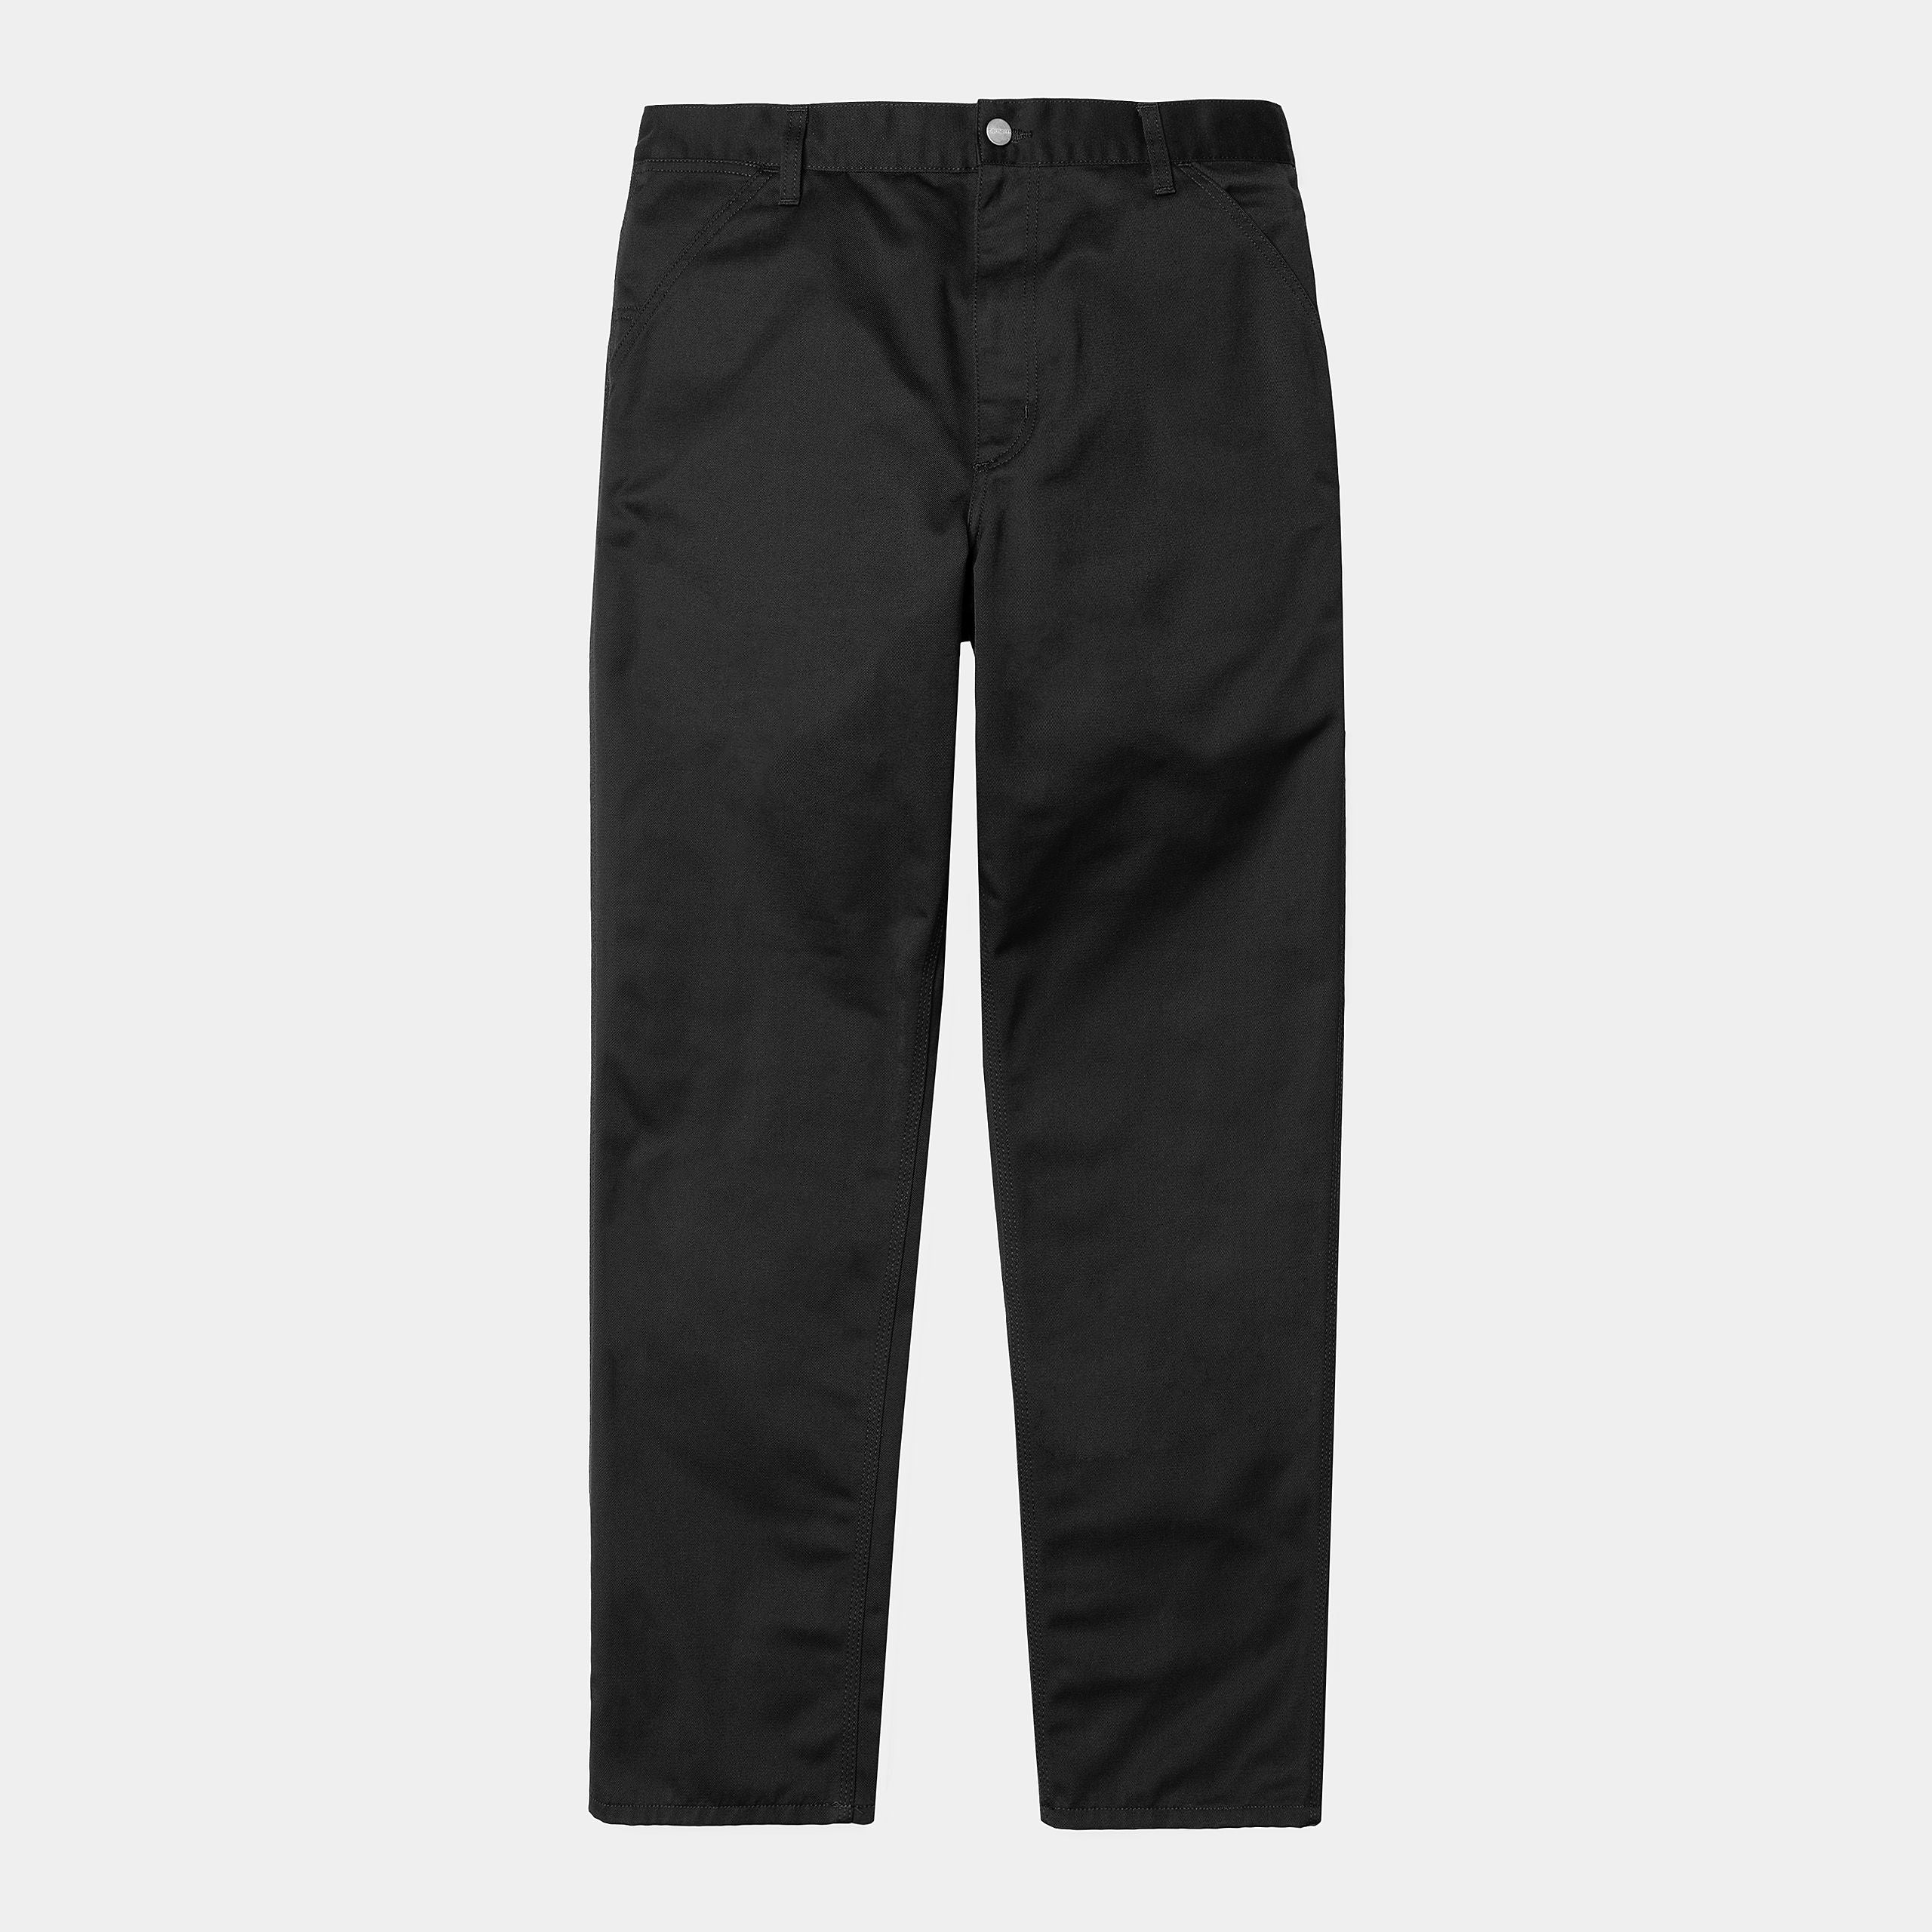 Carhartt Wip Simple Pant Polyester/cotton Denison Twill, 8.8 Oz Black Rinsed Men